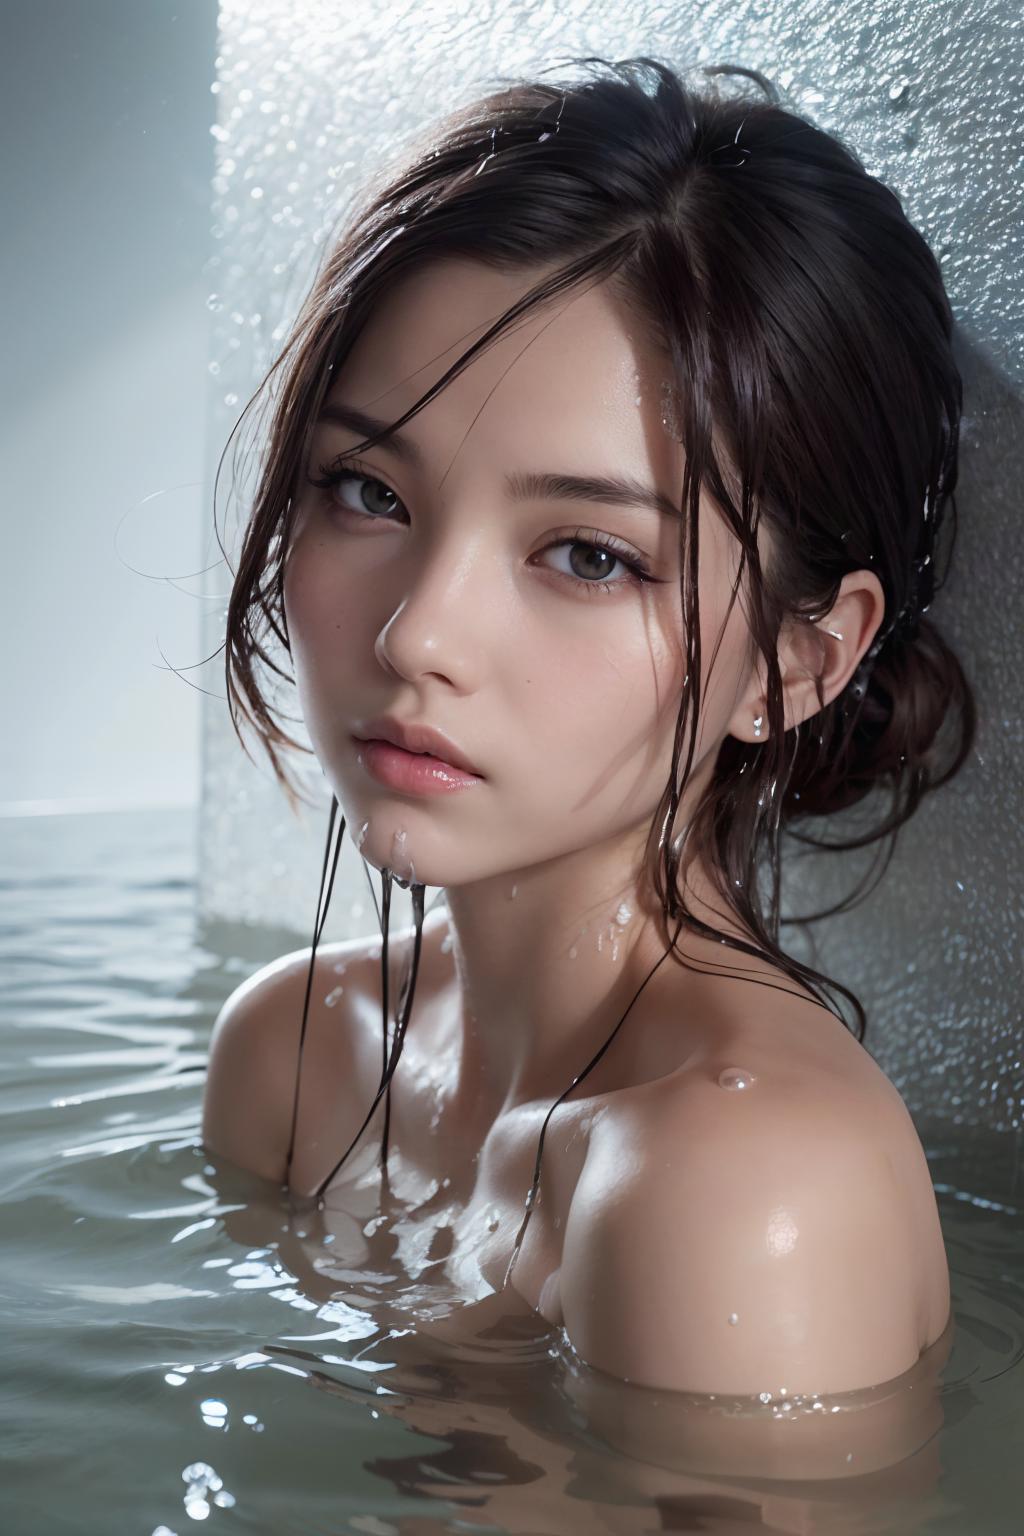 A young woman with long dark hair and water droplets on her face is looking at the camera.